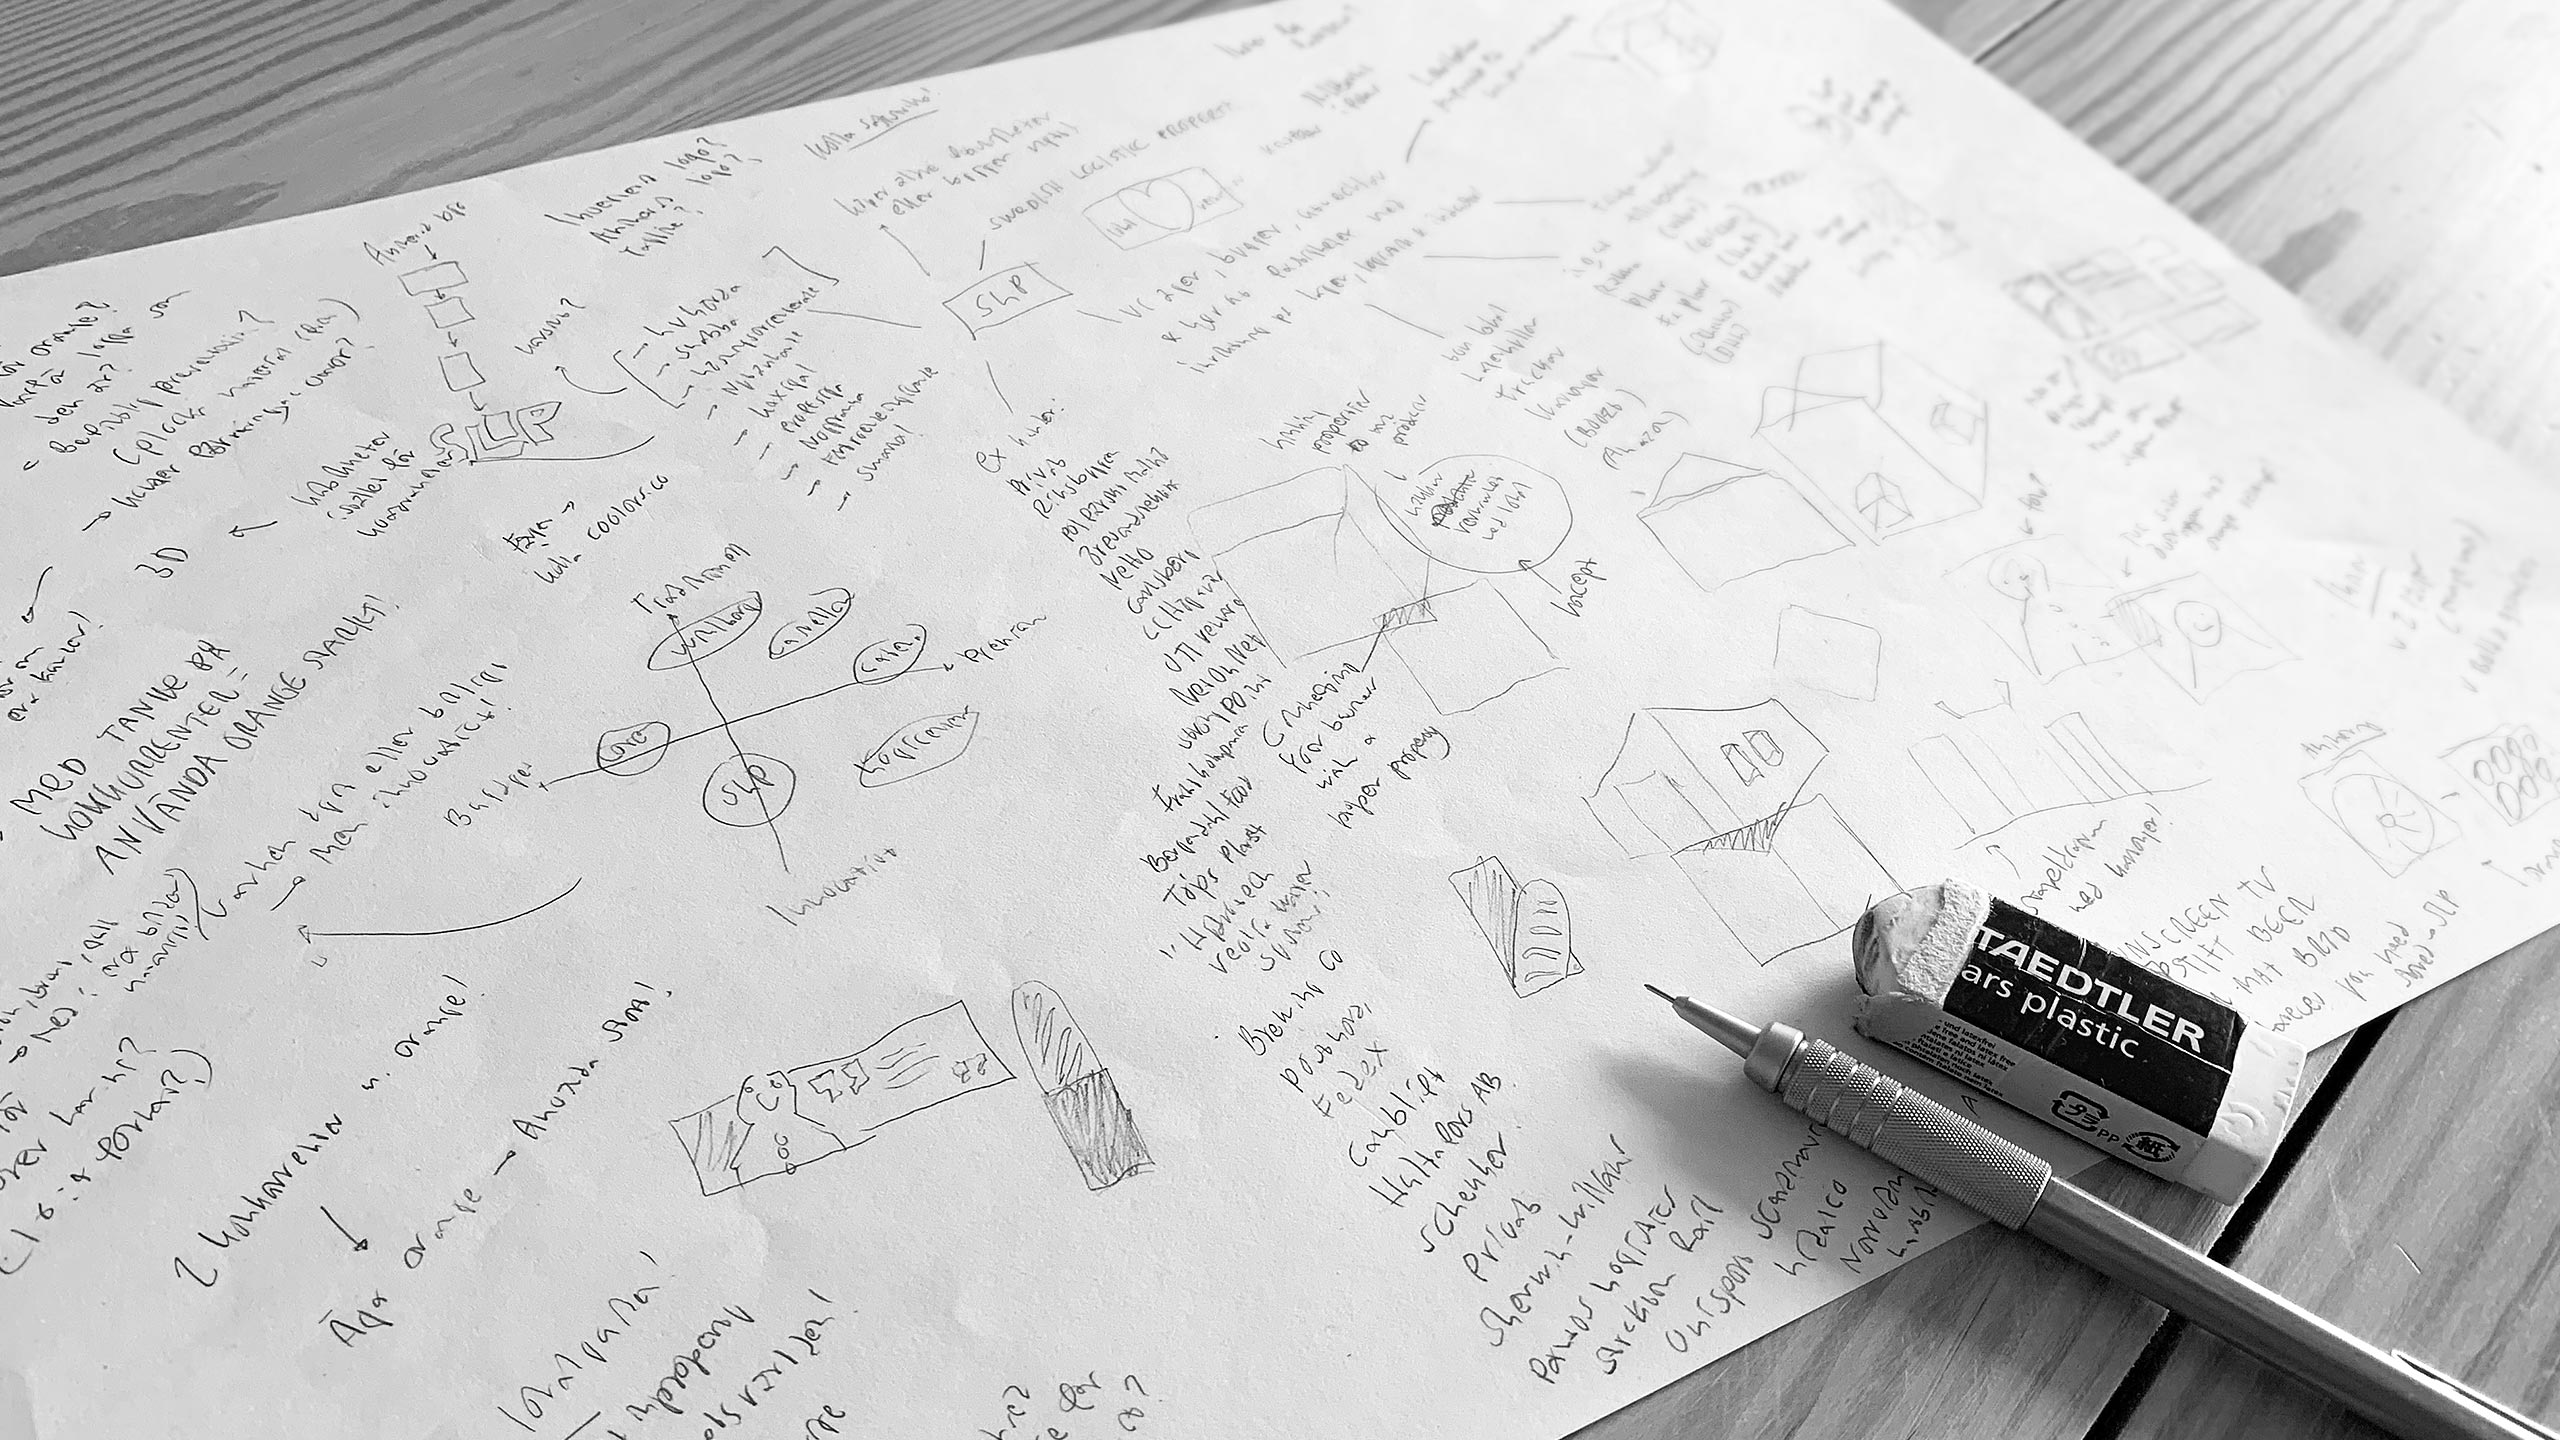 Image of brainstorming sketches.